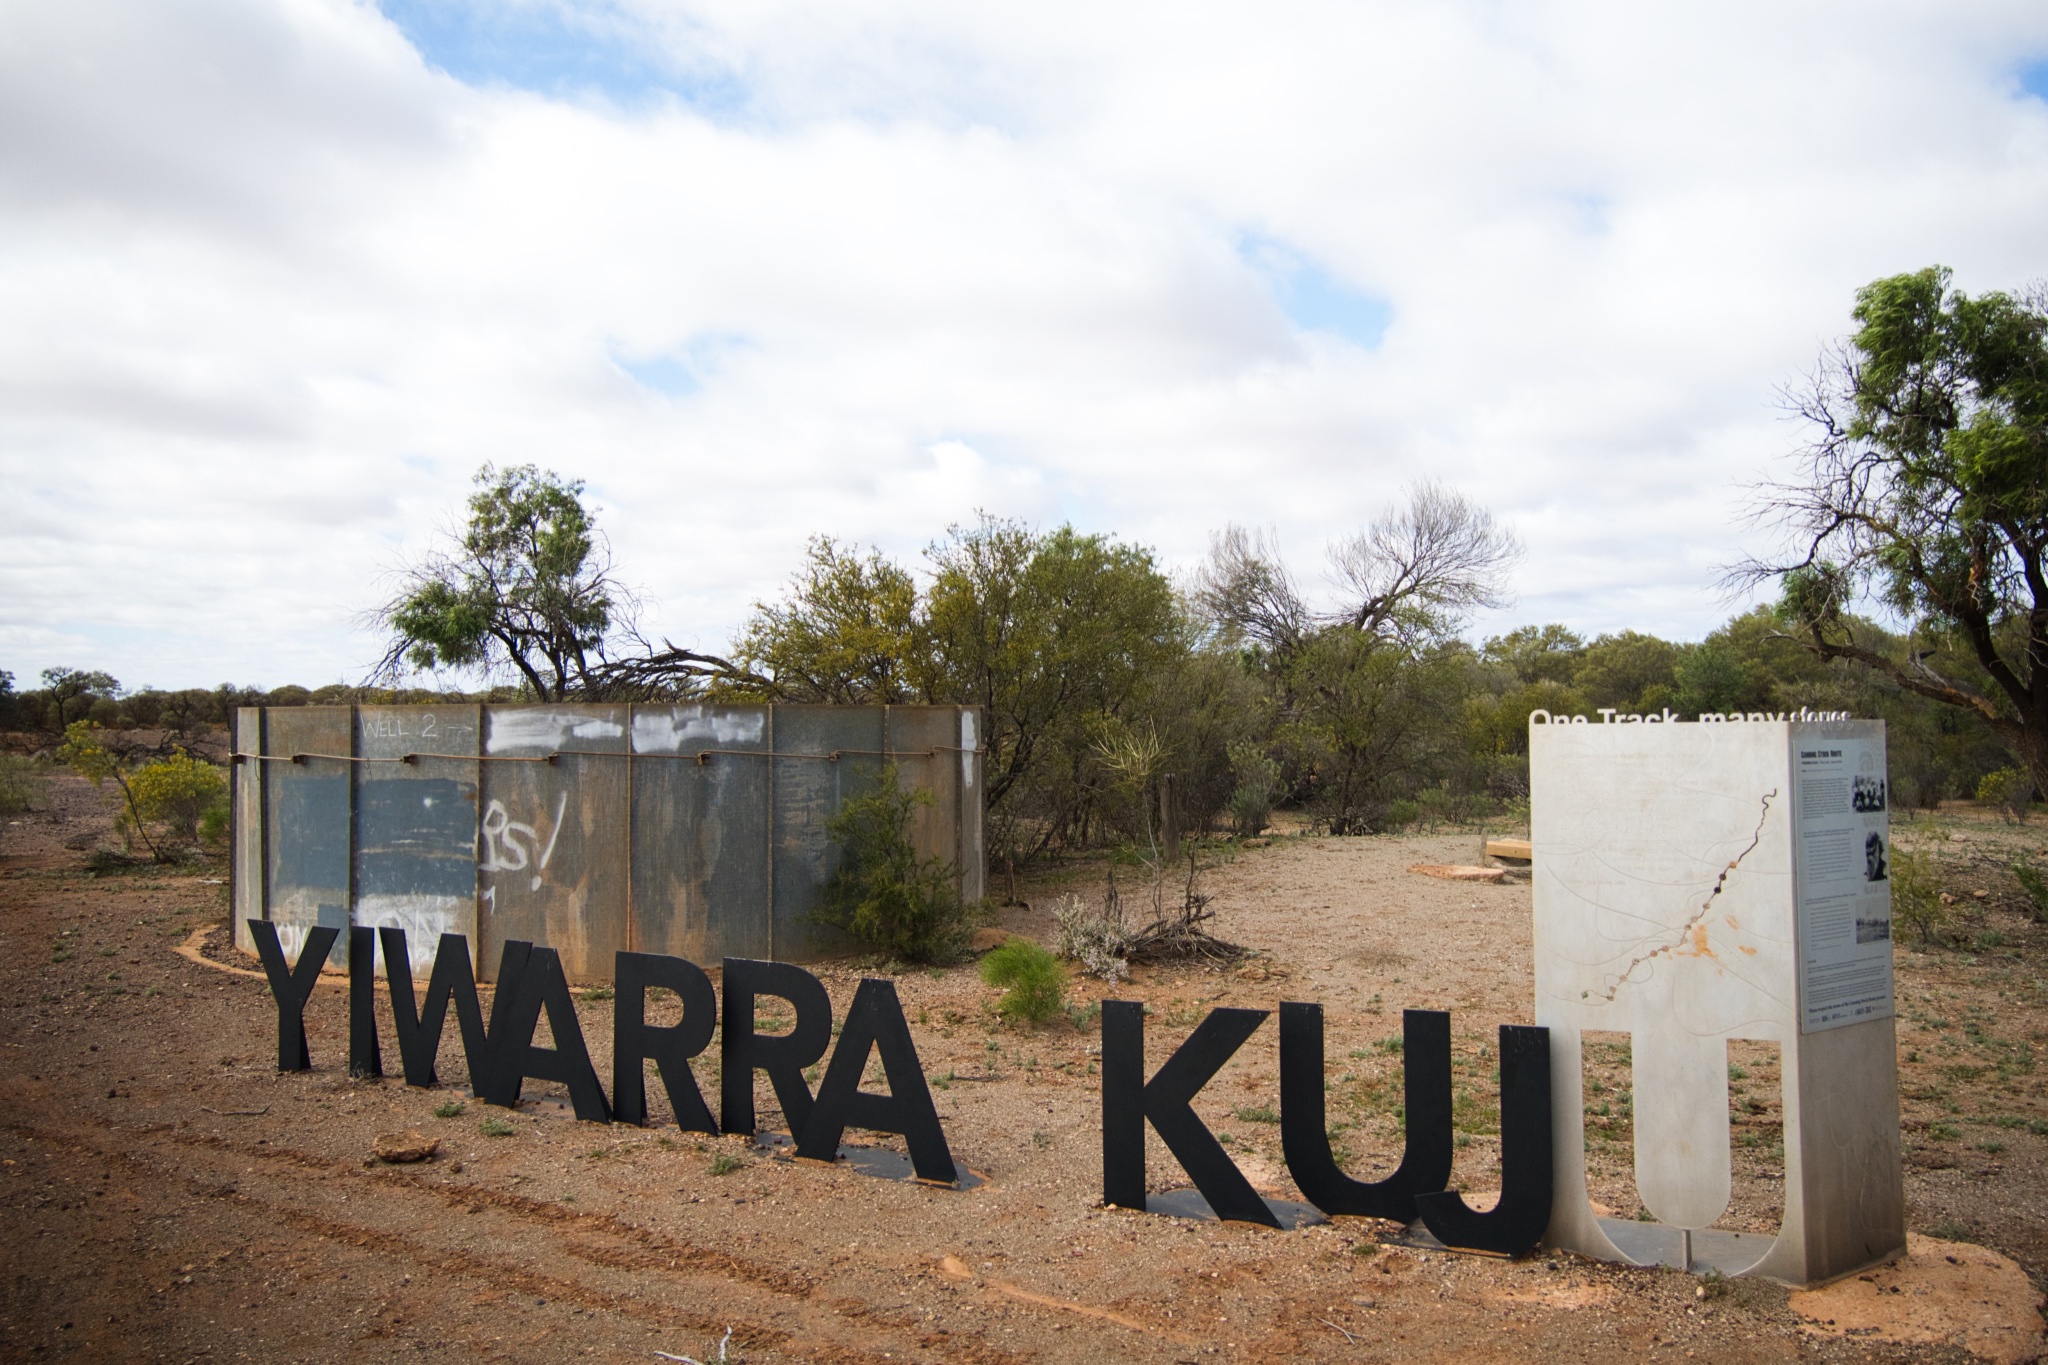 Yiwarra Kuju (one road) sign at the first well on the CSR